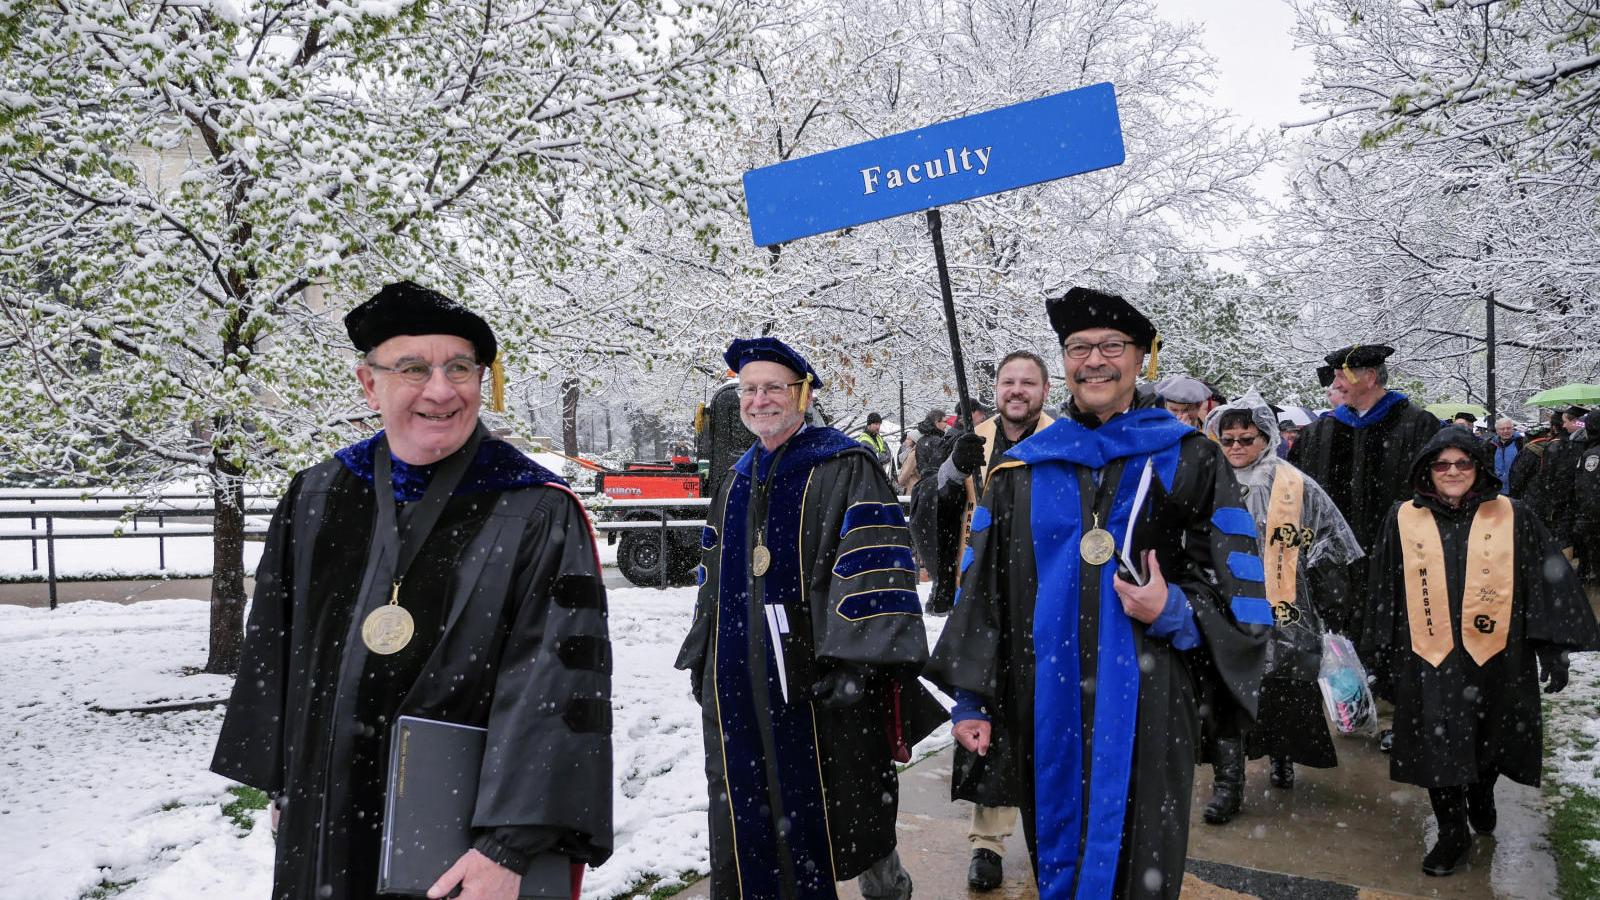 Faculty at commencement 